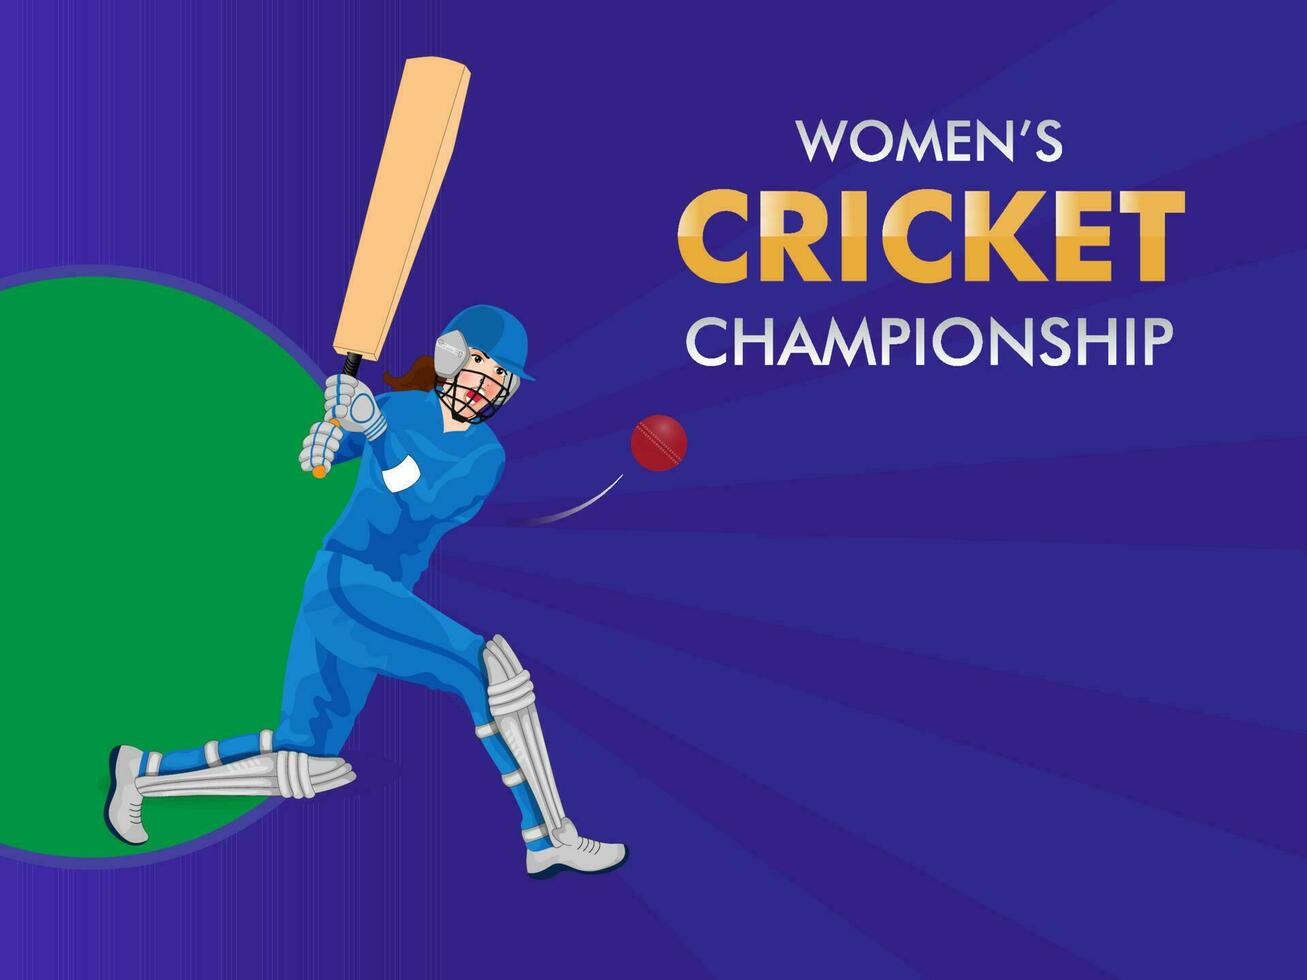 Women's Cricket Championship Concept With India Batter Player Hitting The Ball On Violet Rays Background. vector